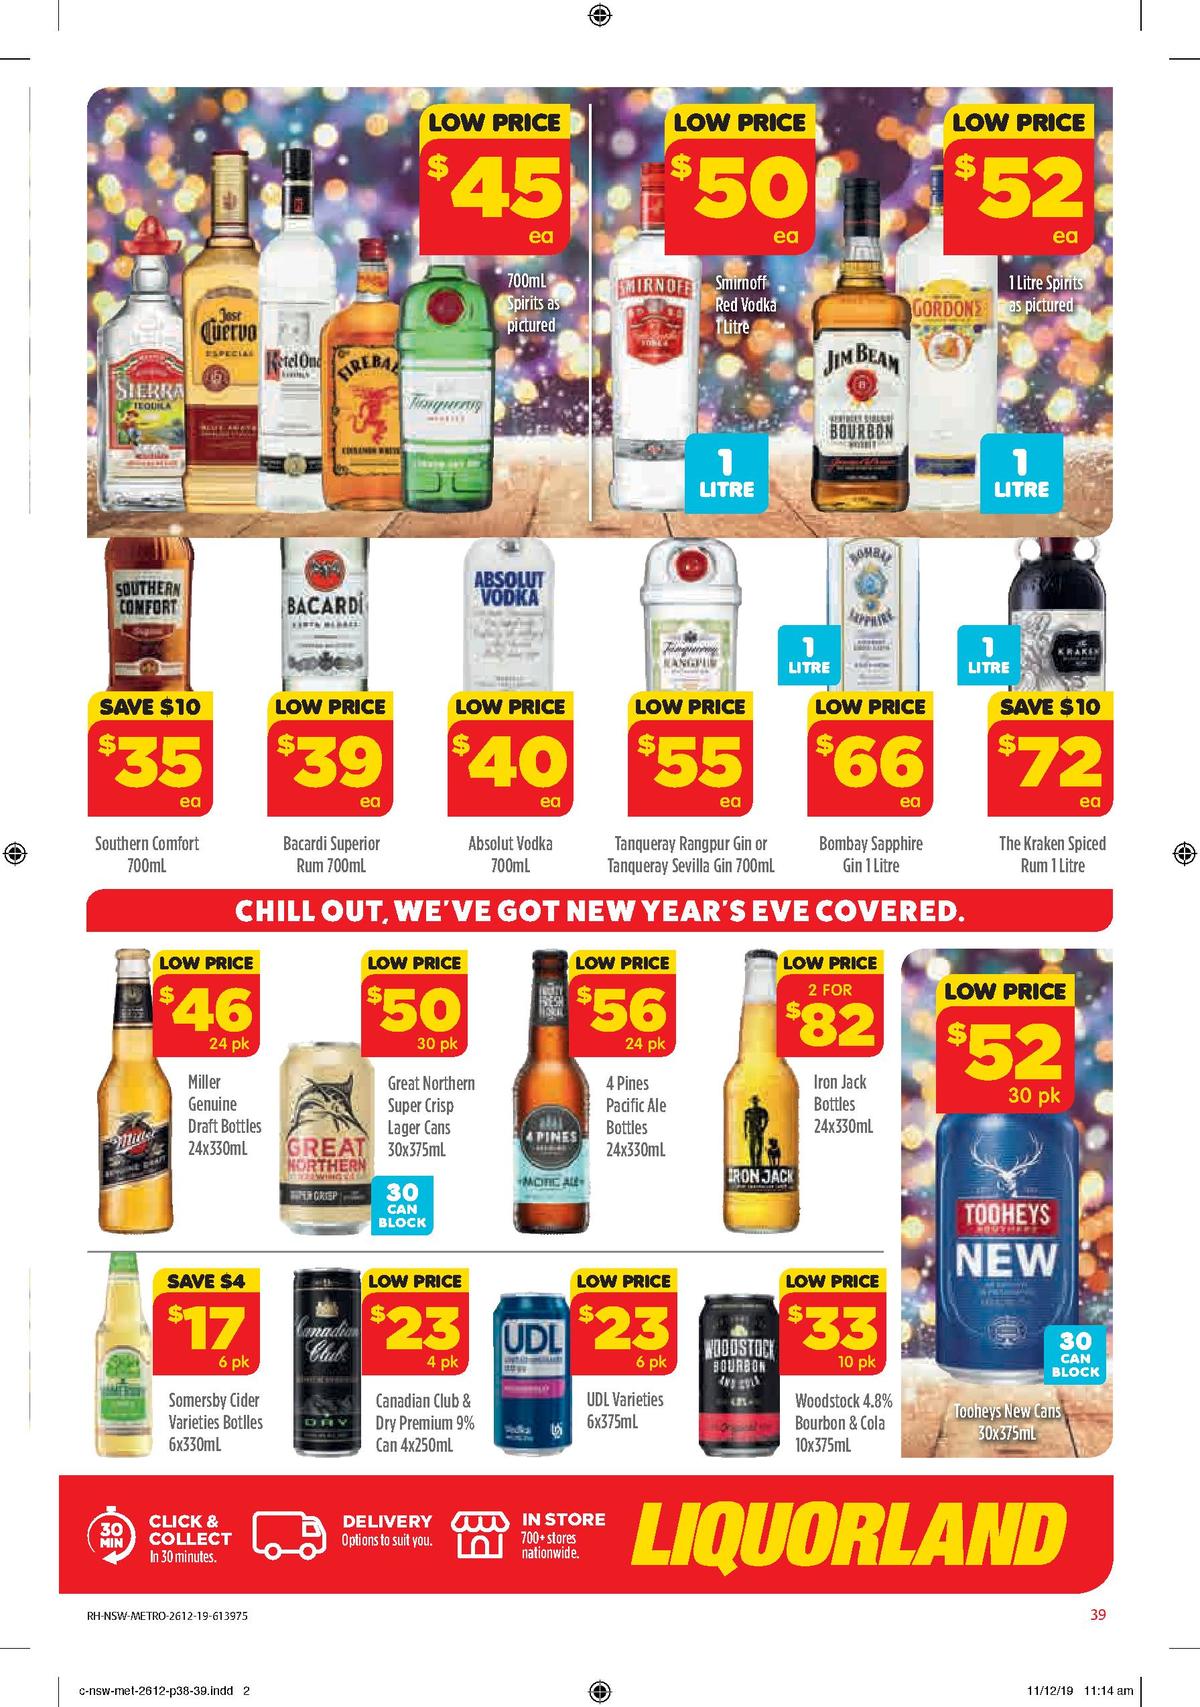 Coles Catalogues from 26 December